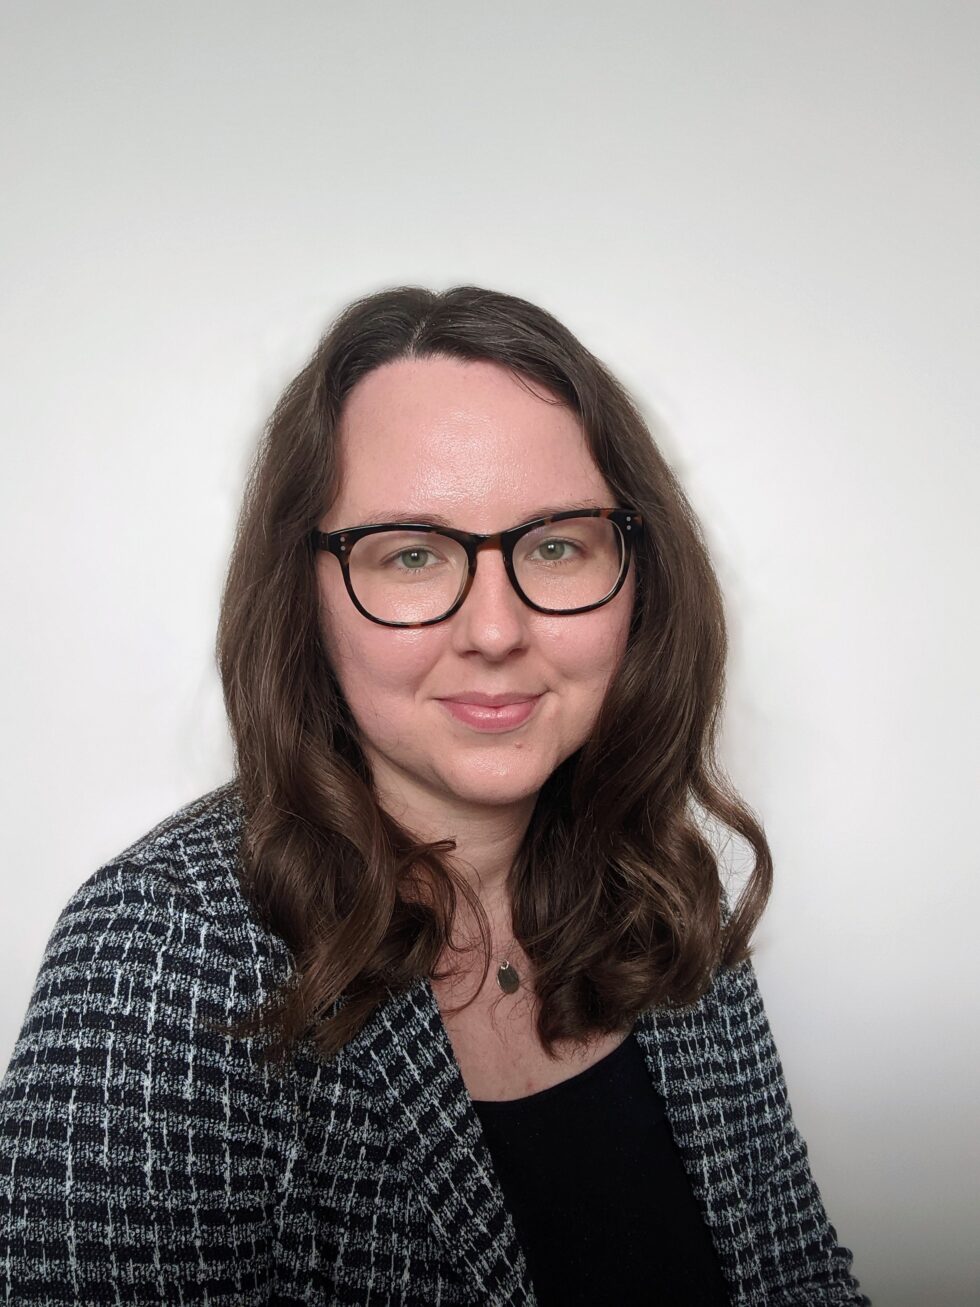 Meet Sophie Packer, Innovation Growth Manager at the University of Kent